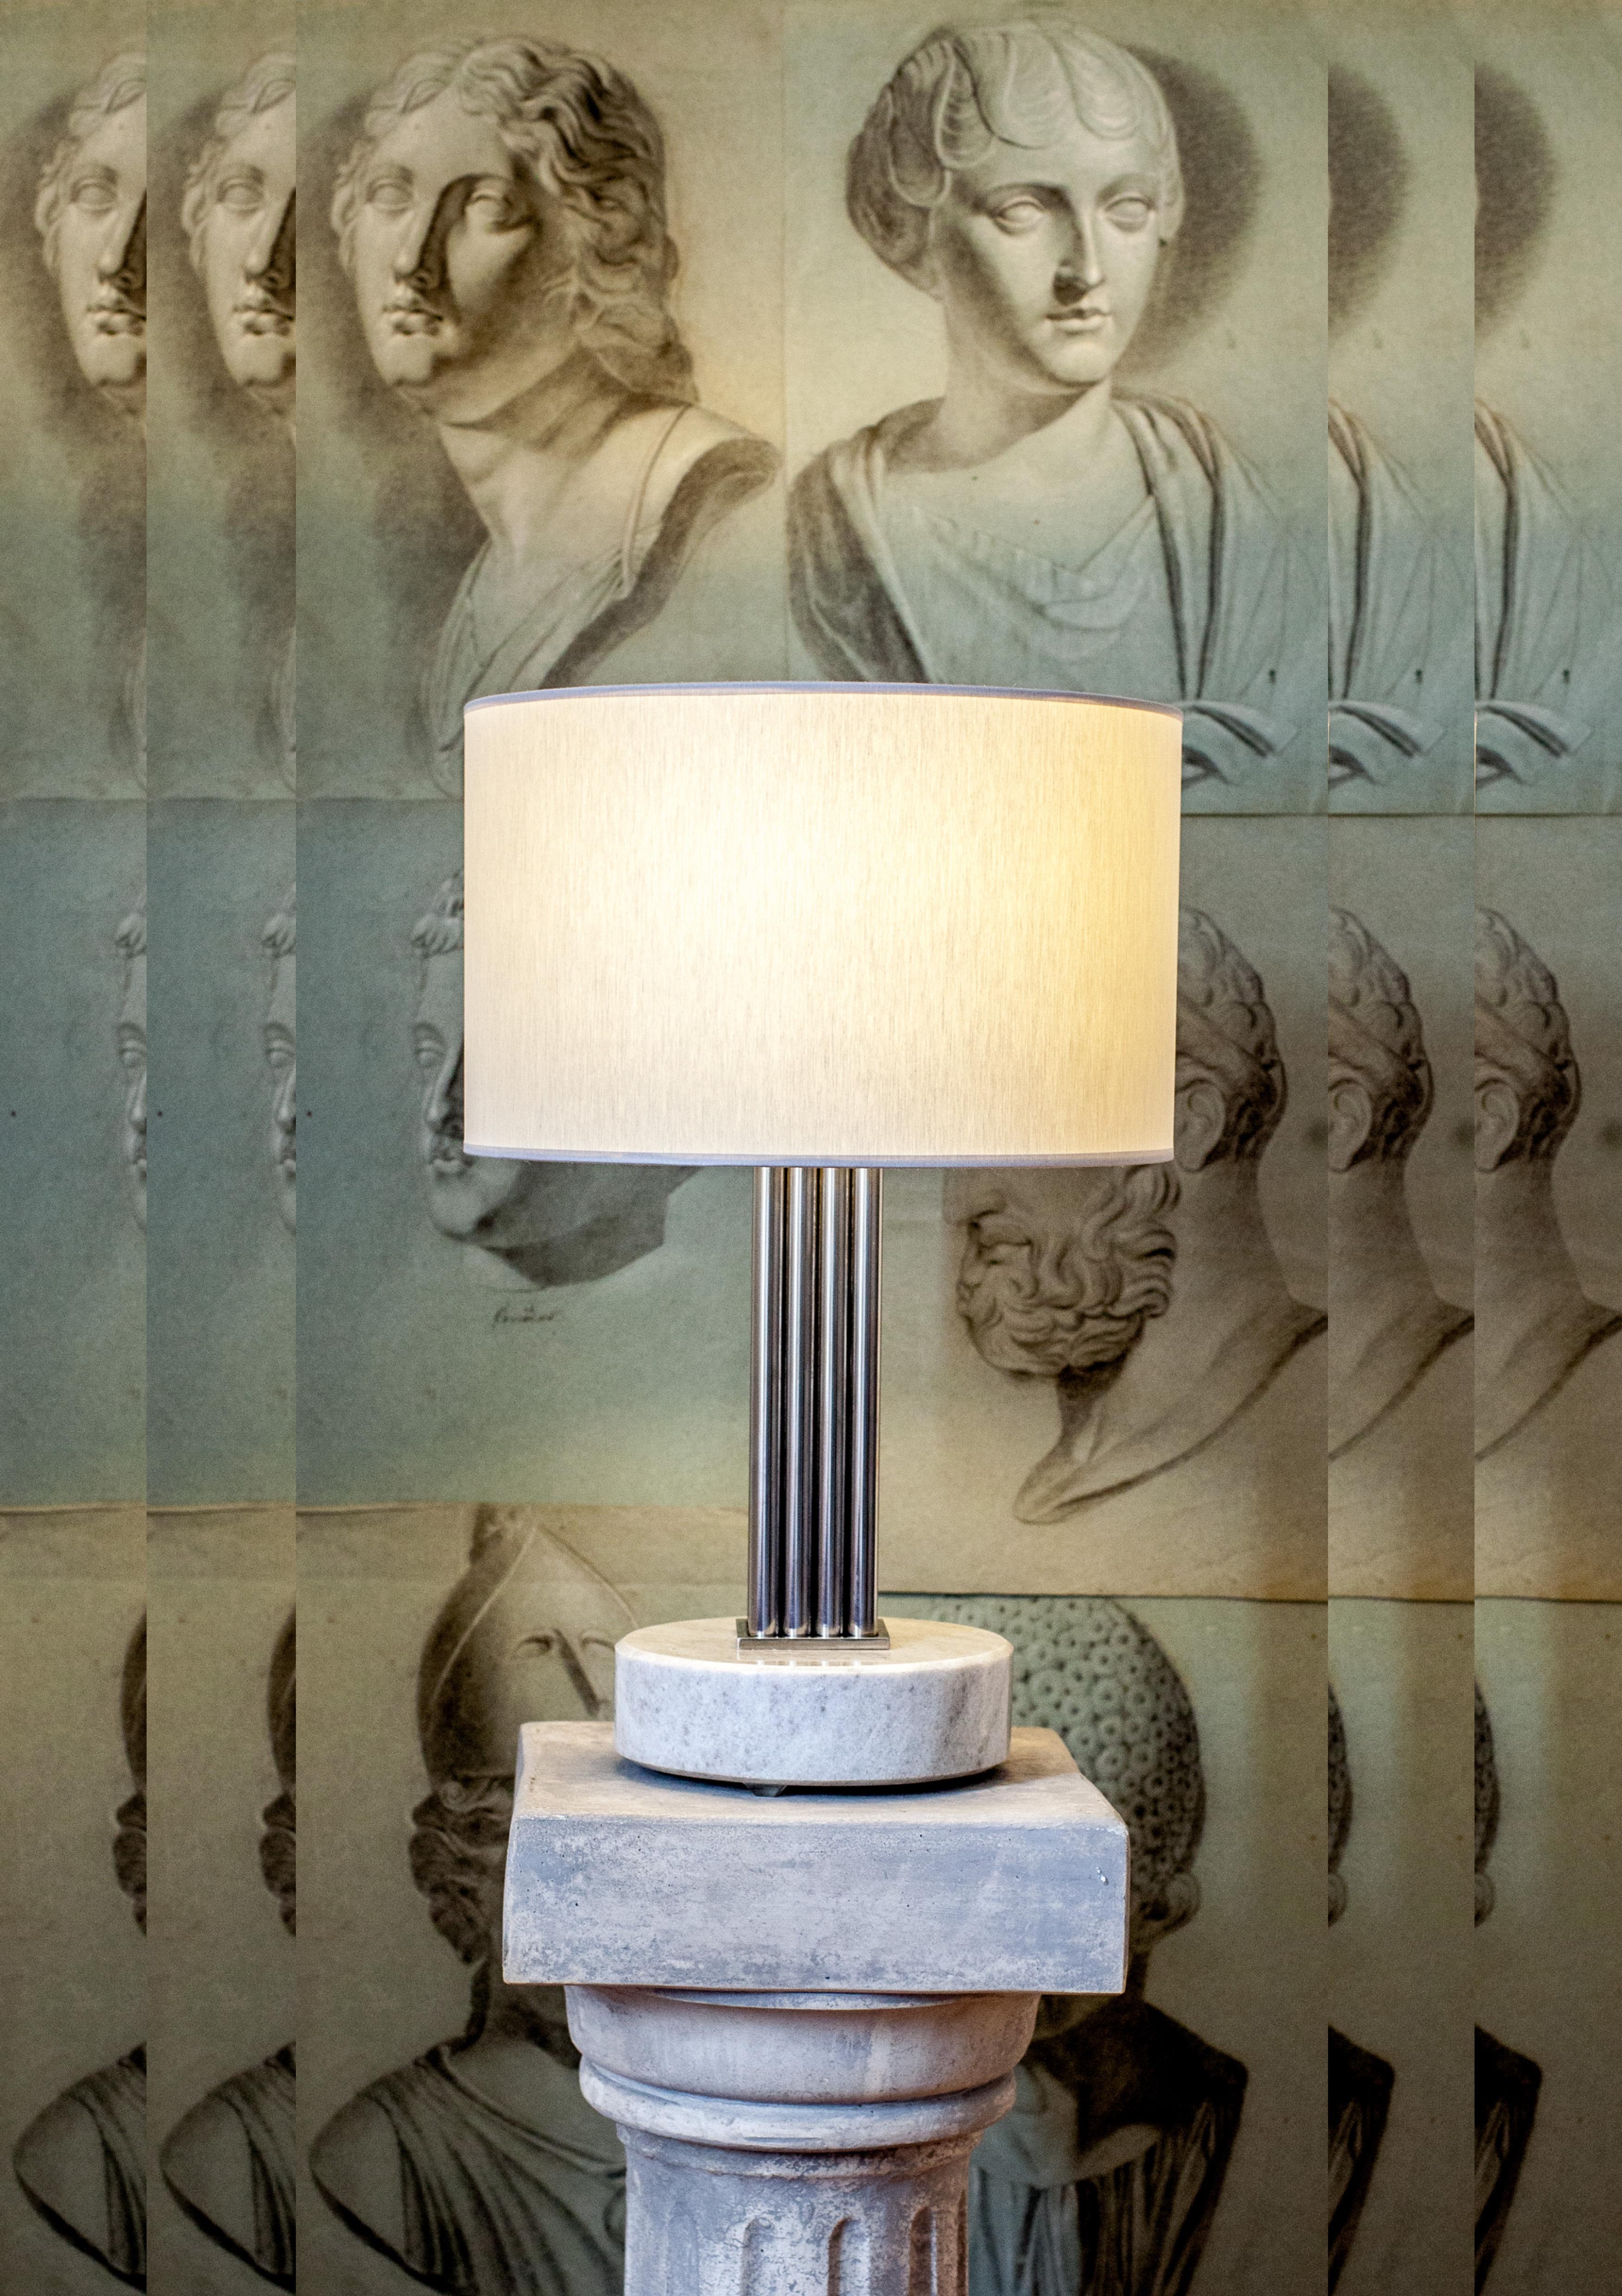 Brass sculpted table lamp by Bijelic and Brajak
Athens 1.4
Mura marble (also available with Carrara marble)
Polished brass
Dimensions: 53 x 35 x 35 cm
white or black cotton lampshade, cotton wiring


Bijelic and Brajak are two architects from